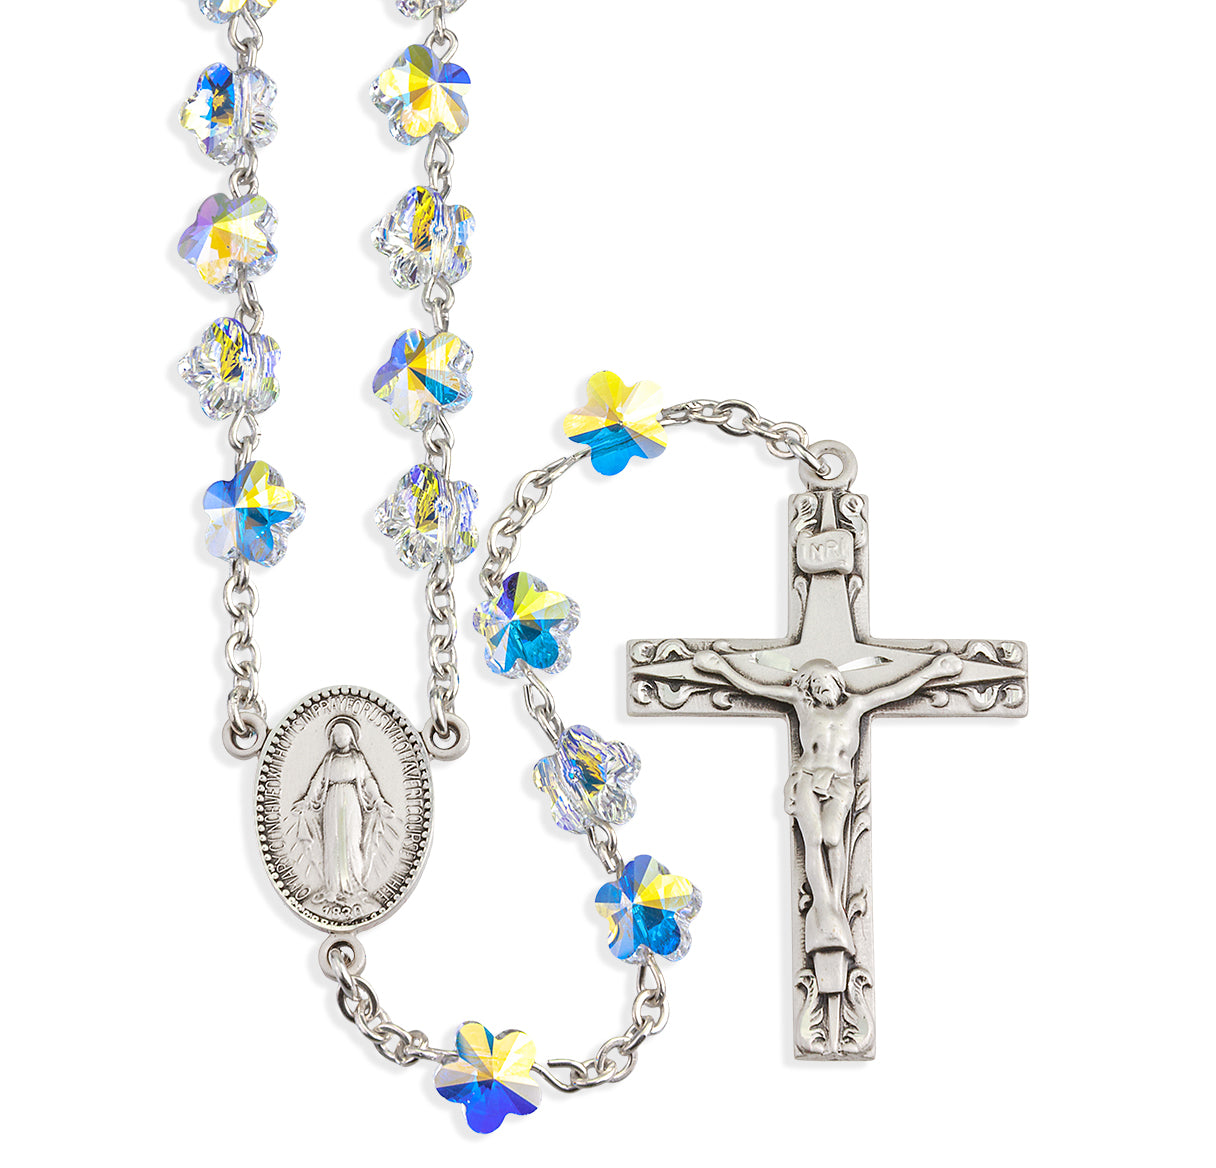 Sterling Silver Rosary Hand Made with Swarovski Crystal 8mm Aurora Borealis Flower Shape Beads by HMH